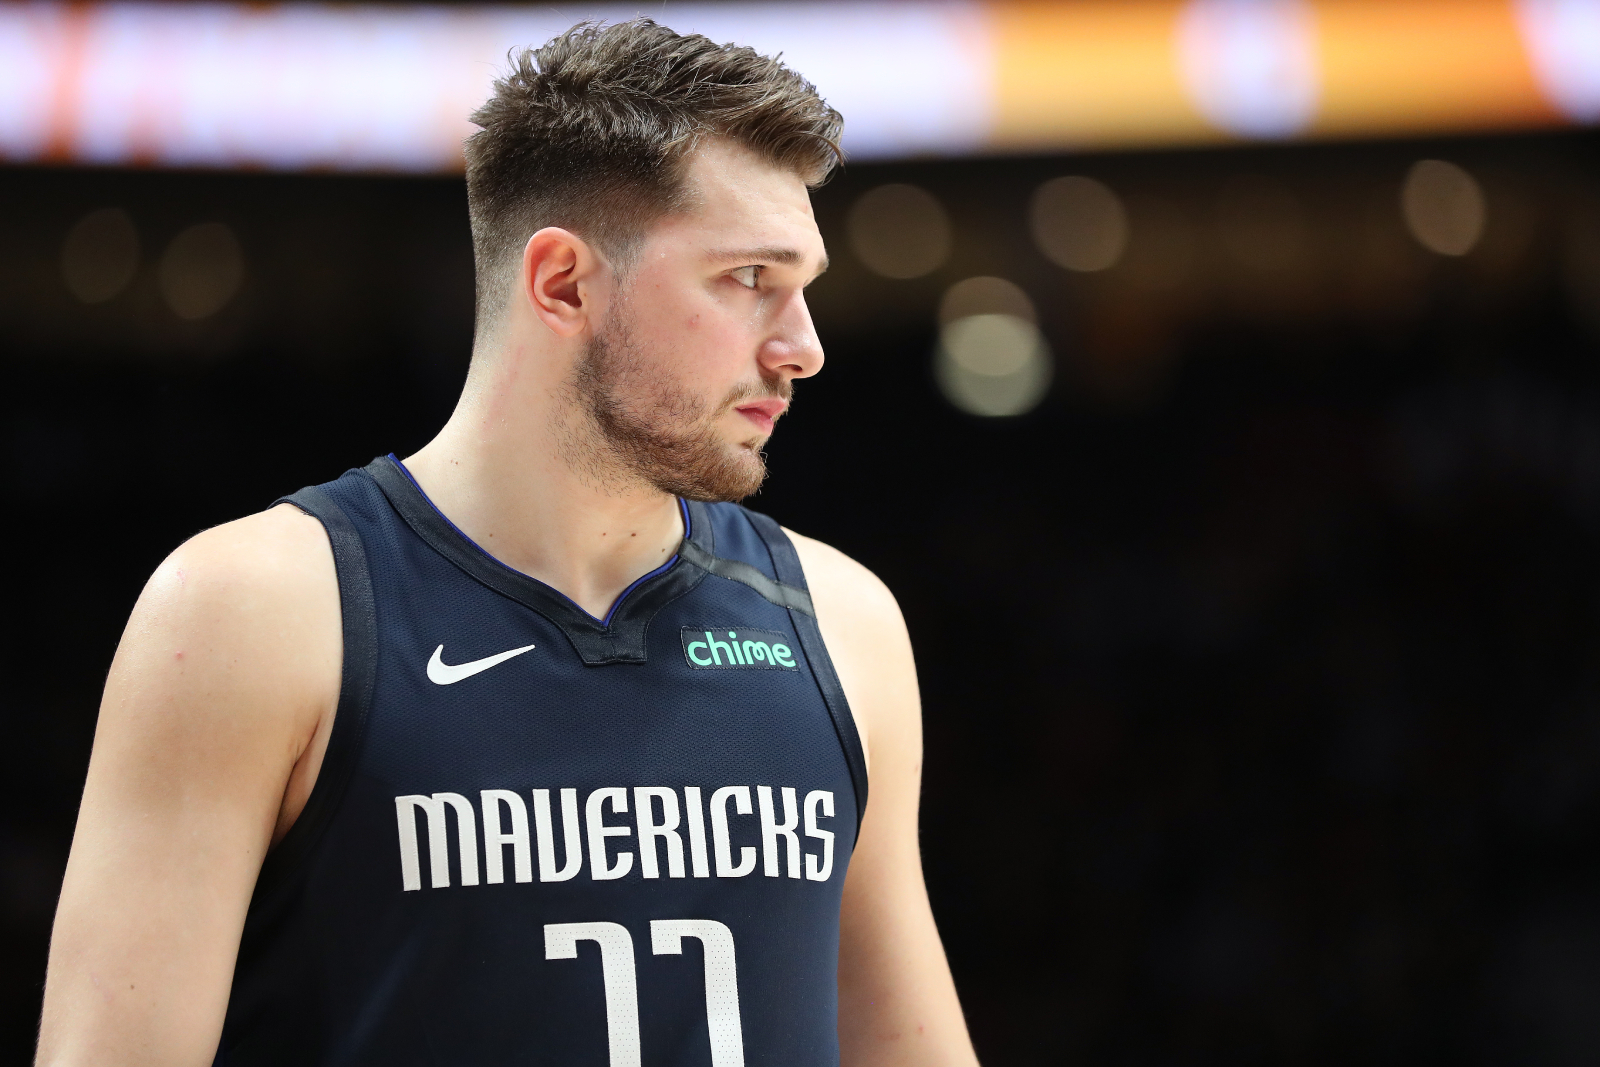 Luka Doncic has a chance to make a ton of money in the NBA. However, his agent Bill Duffy has already paid millions for his big mistake.